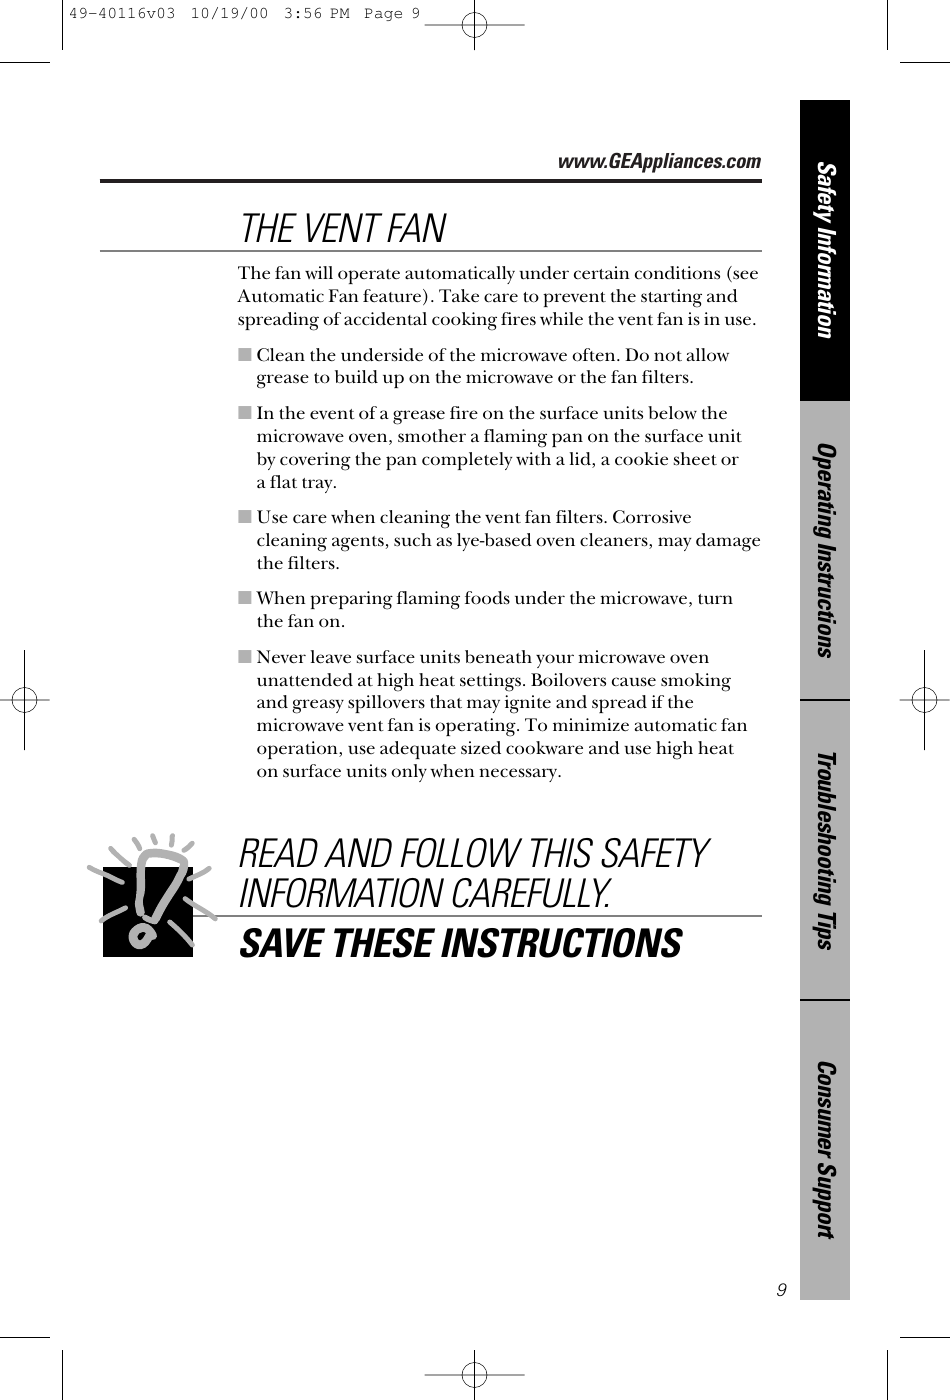 www.GEAppliances.comConsumer SupportTroubleshooting TipsOperating InstructionsSafety Information9The fan will operate automatically under certain conditions (seeAutomatic Fan feature). Take care to prevent the starting andspreading of accidental cooking fires while the vent fan is in use. ■Clean the underside of the microwave often. Do not allowgrease to build up on the microwave or the fan filters.■In the event of a grease fire on the surface units below themicrowave oven, smother a flaming pan on the surface unitby covering the pan completely with a lid, a cookie sheet or a flat tray.■Use care when cleaning the vent fan filters. Corrosivecleaning agents, such as lye-based oven cleaners, may damagethe filters.■When preparing flaming foods under the microwave, turnthe fan on. ■Never leave surface units beneath your microwave ovenunattended at high heat settings. Boilovers cause smokingand greasy spillovers that may ignite and spread if themicrowave vent fan is operating. To minimize automatic fanoperation, use adequate sized cookware and use high heat on surface units only when necessary.THE VENT FANREAD AND FOLLOW THIS SAFETYINFORMATION CAREFULLY.SAVE THESE INSTRUCTIONS49-40116v03  10/19/00  3:56 PM  Page 9